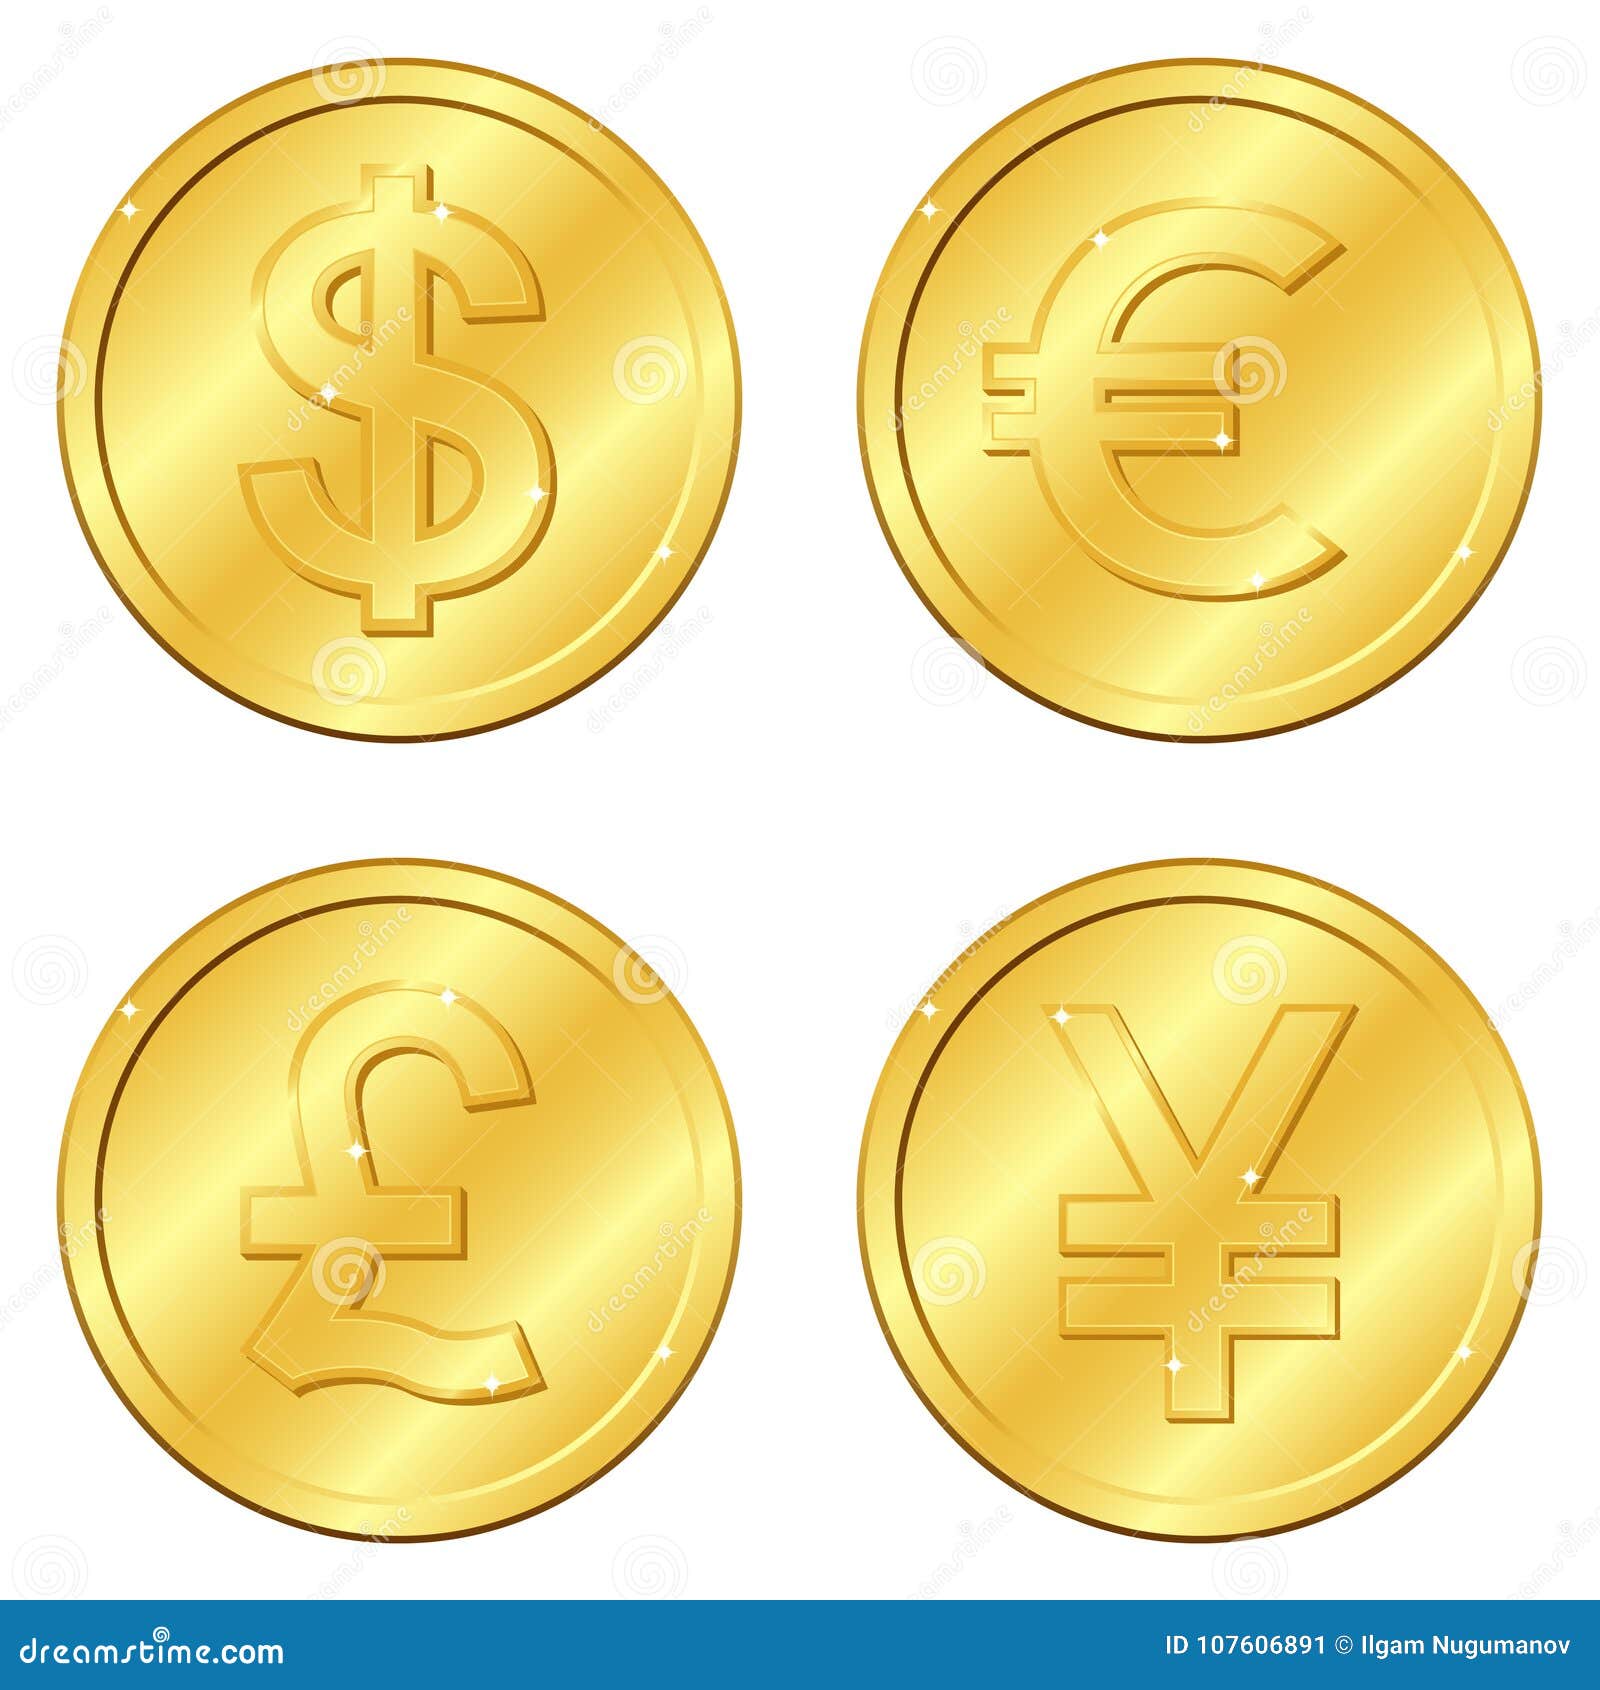  . set of gold coins with 4 major currencies. dollar, euro, pound sterling, yuan or yen. chips. editable